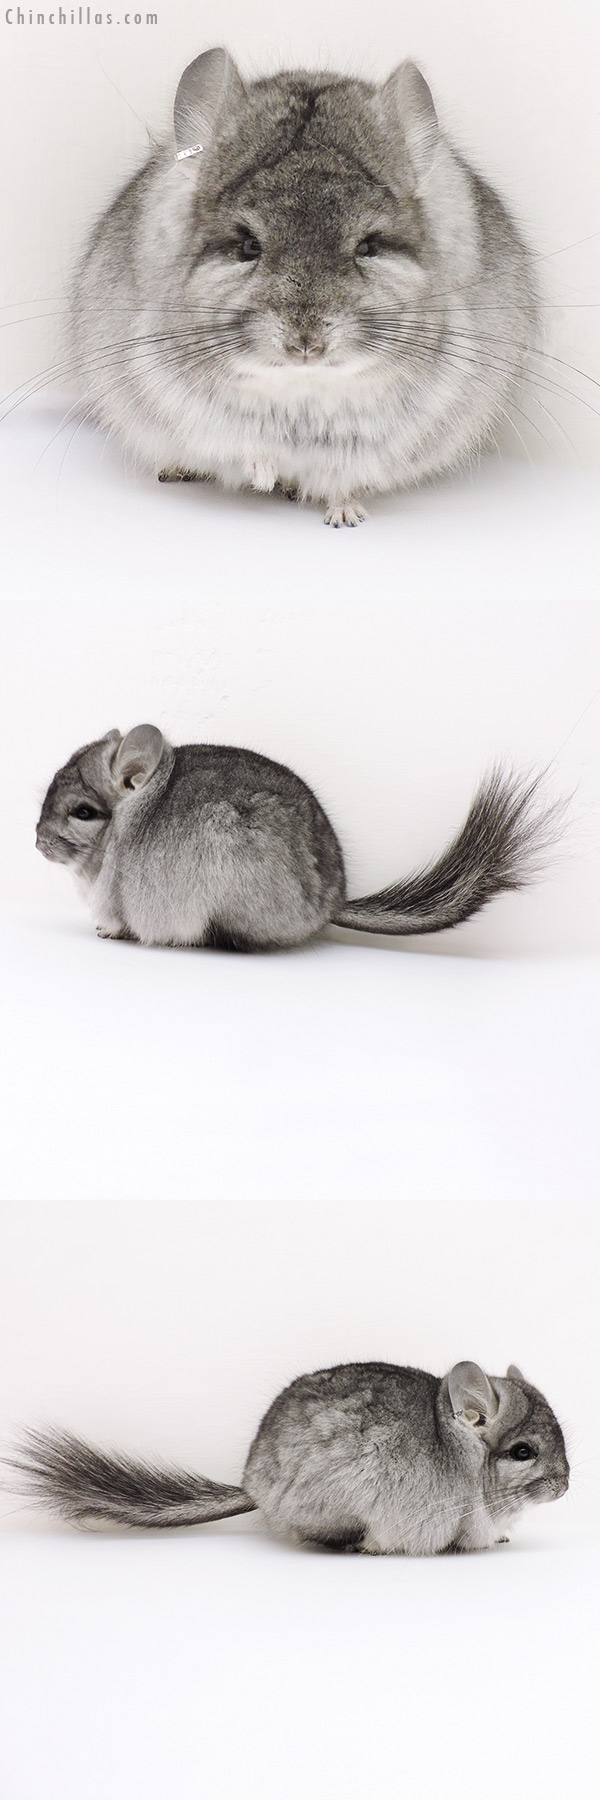 Chinchilla or related item offered for sale or export on Chinchillas.com - 16263 Standard  Royal Persian Angora Male Chinchilla